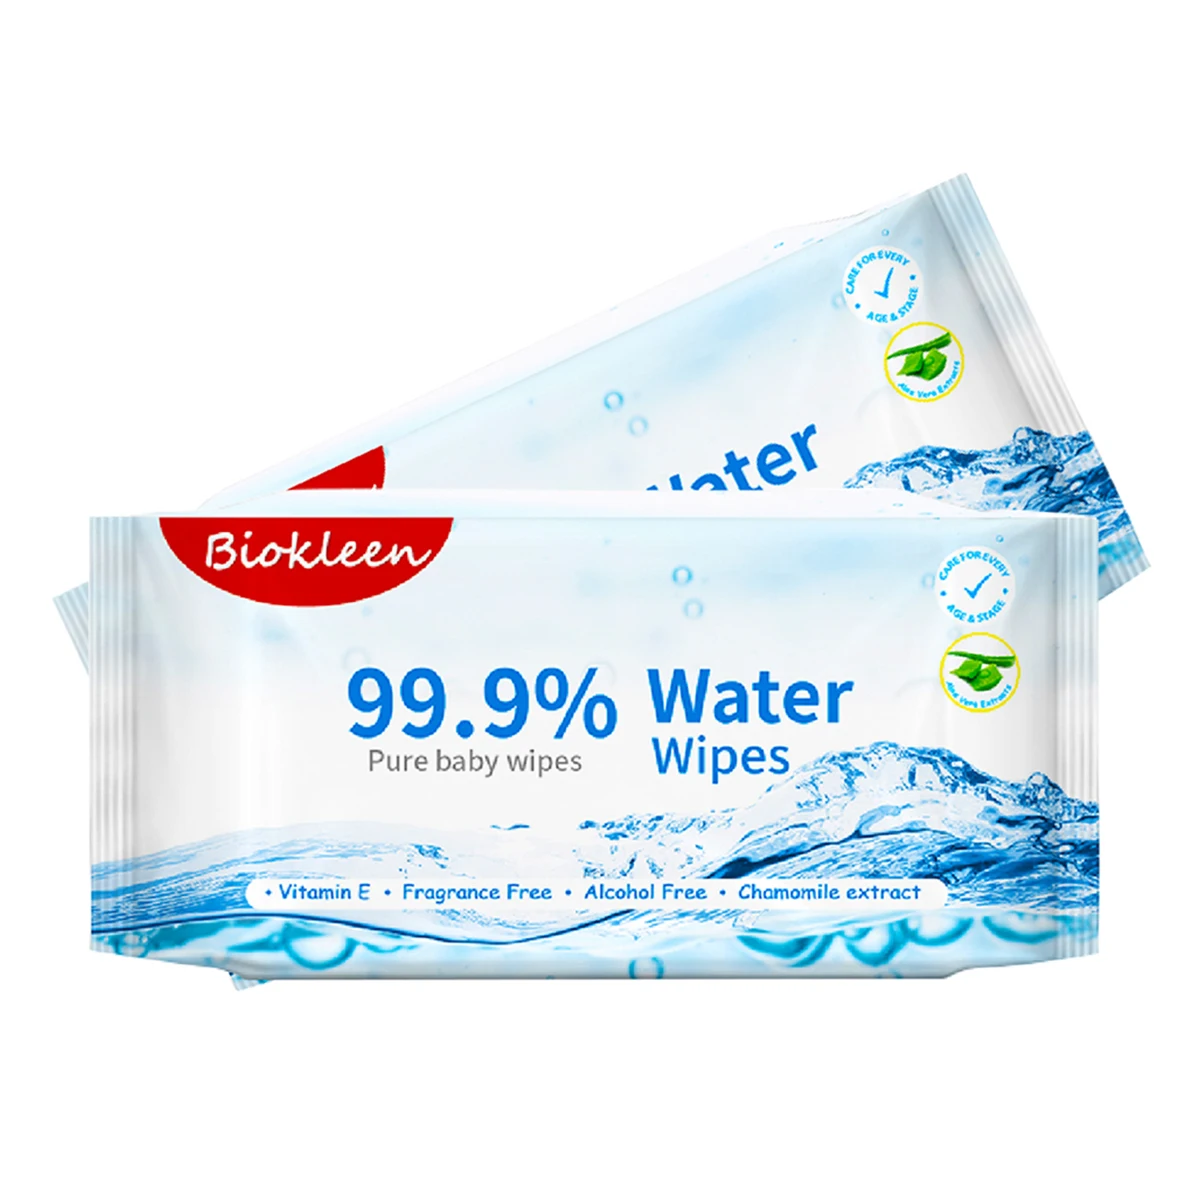 

Biokleen Oem Newborn Babi Wipes Hands and Face Water Wipes Babies 99.9 Pure Water Baby Wipes Biodegradable